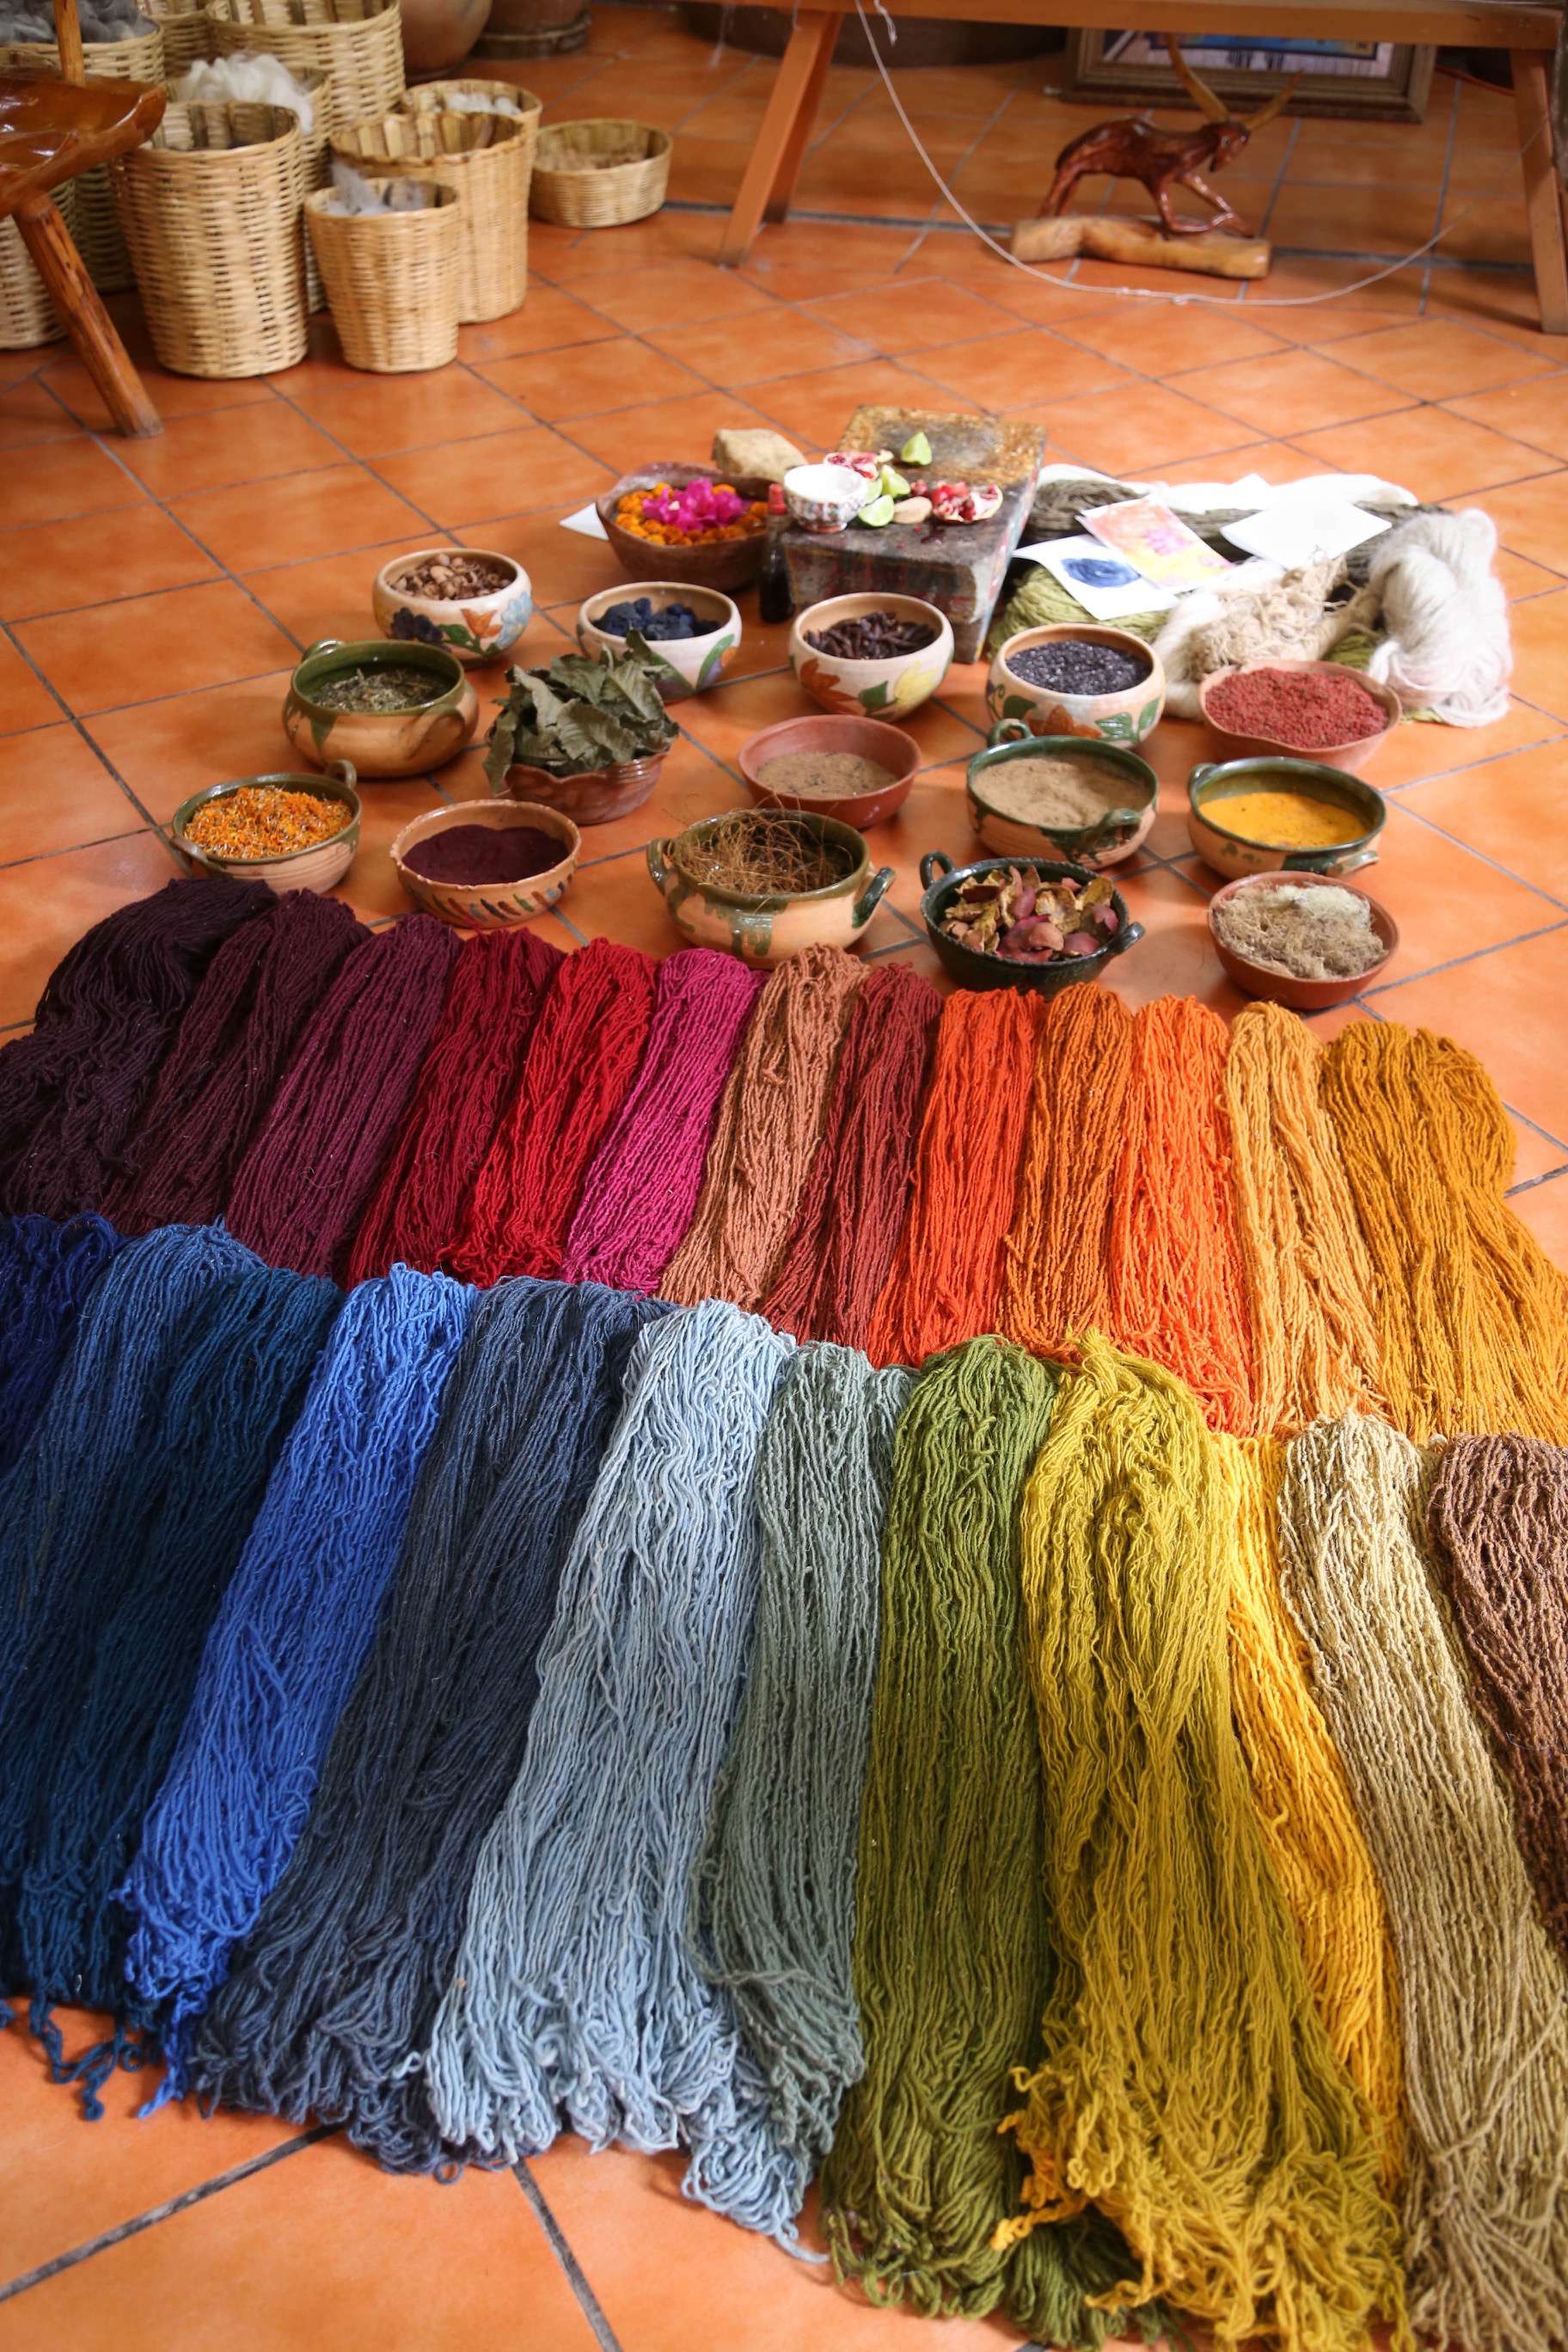 This palette of colors were all created using plants, seeds, barks and other natural materials.